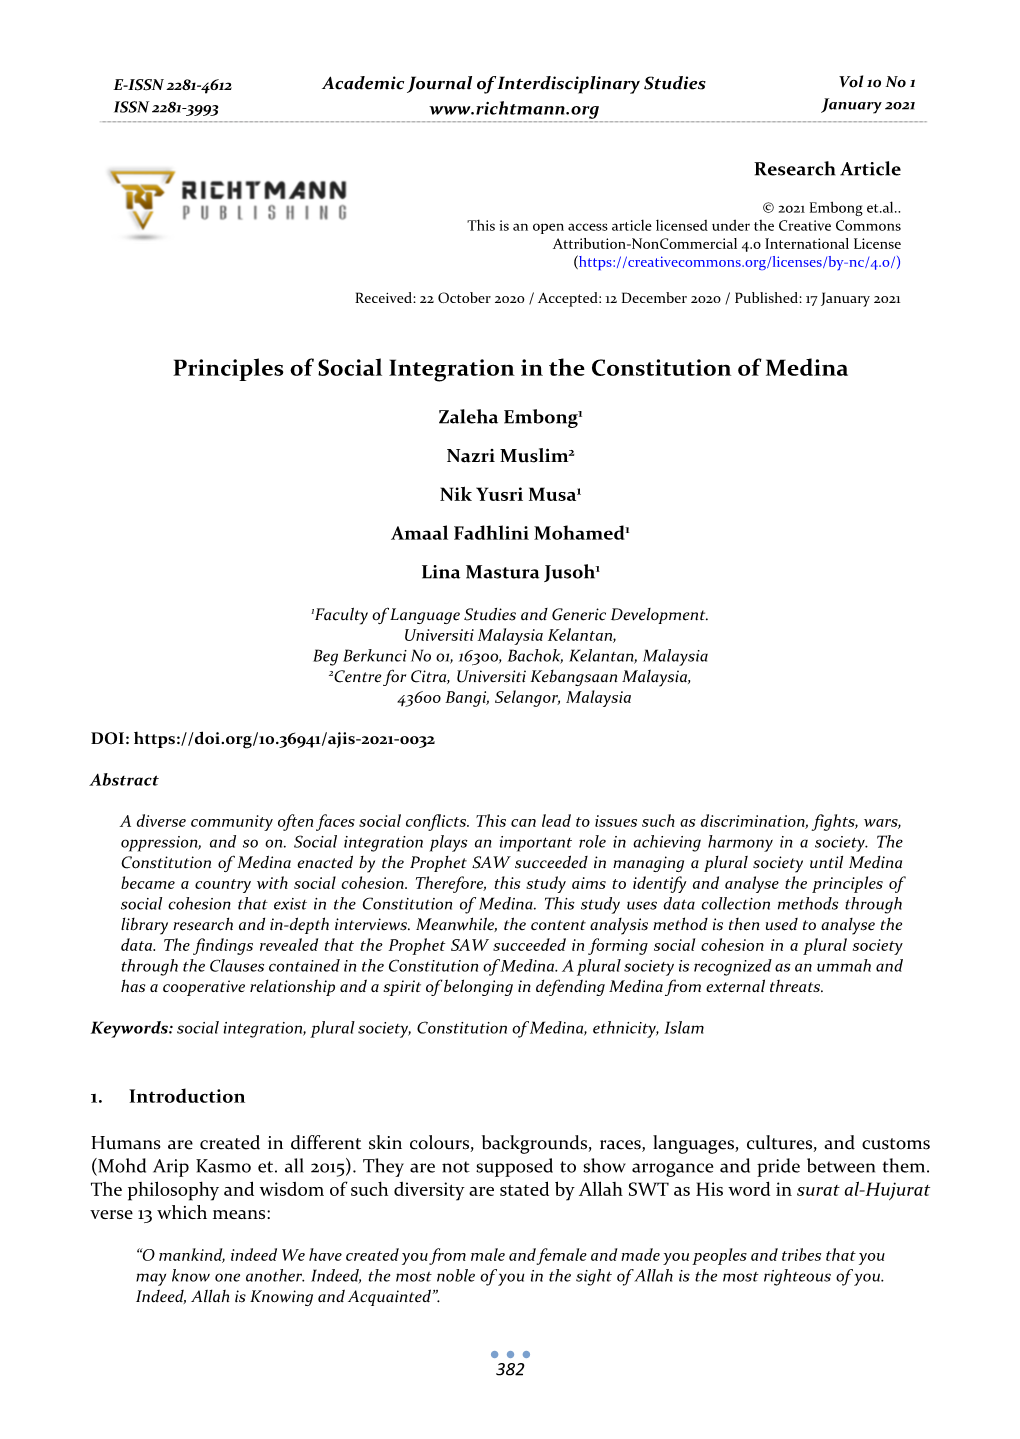 Principles of Social Integration in the Constitution of Medina